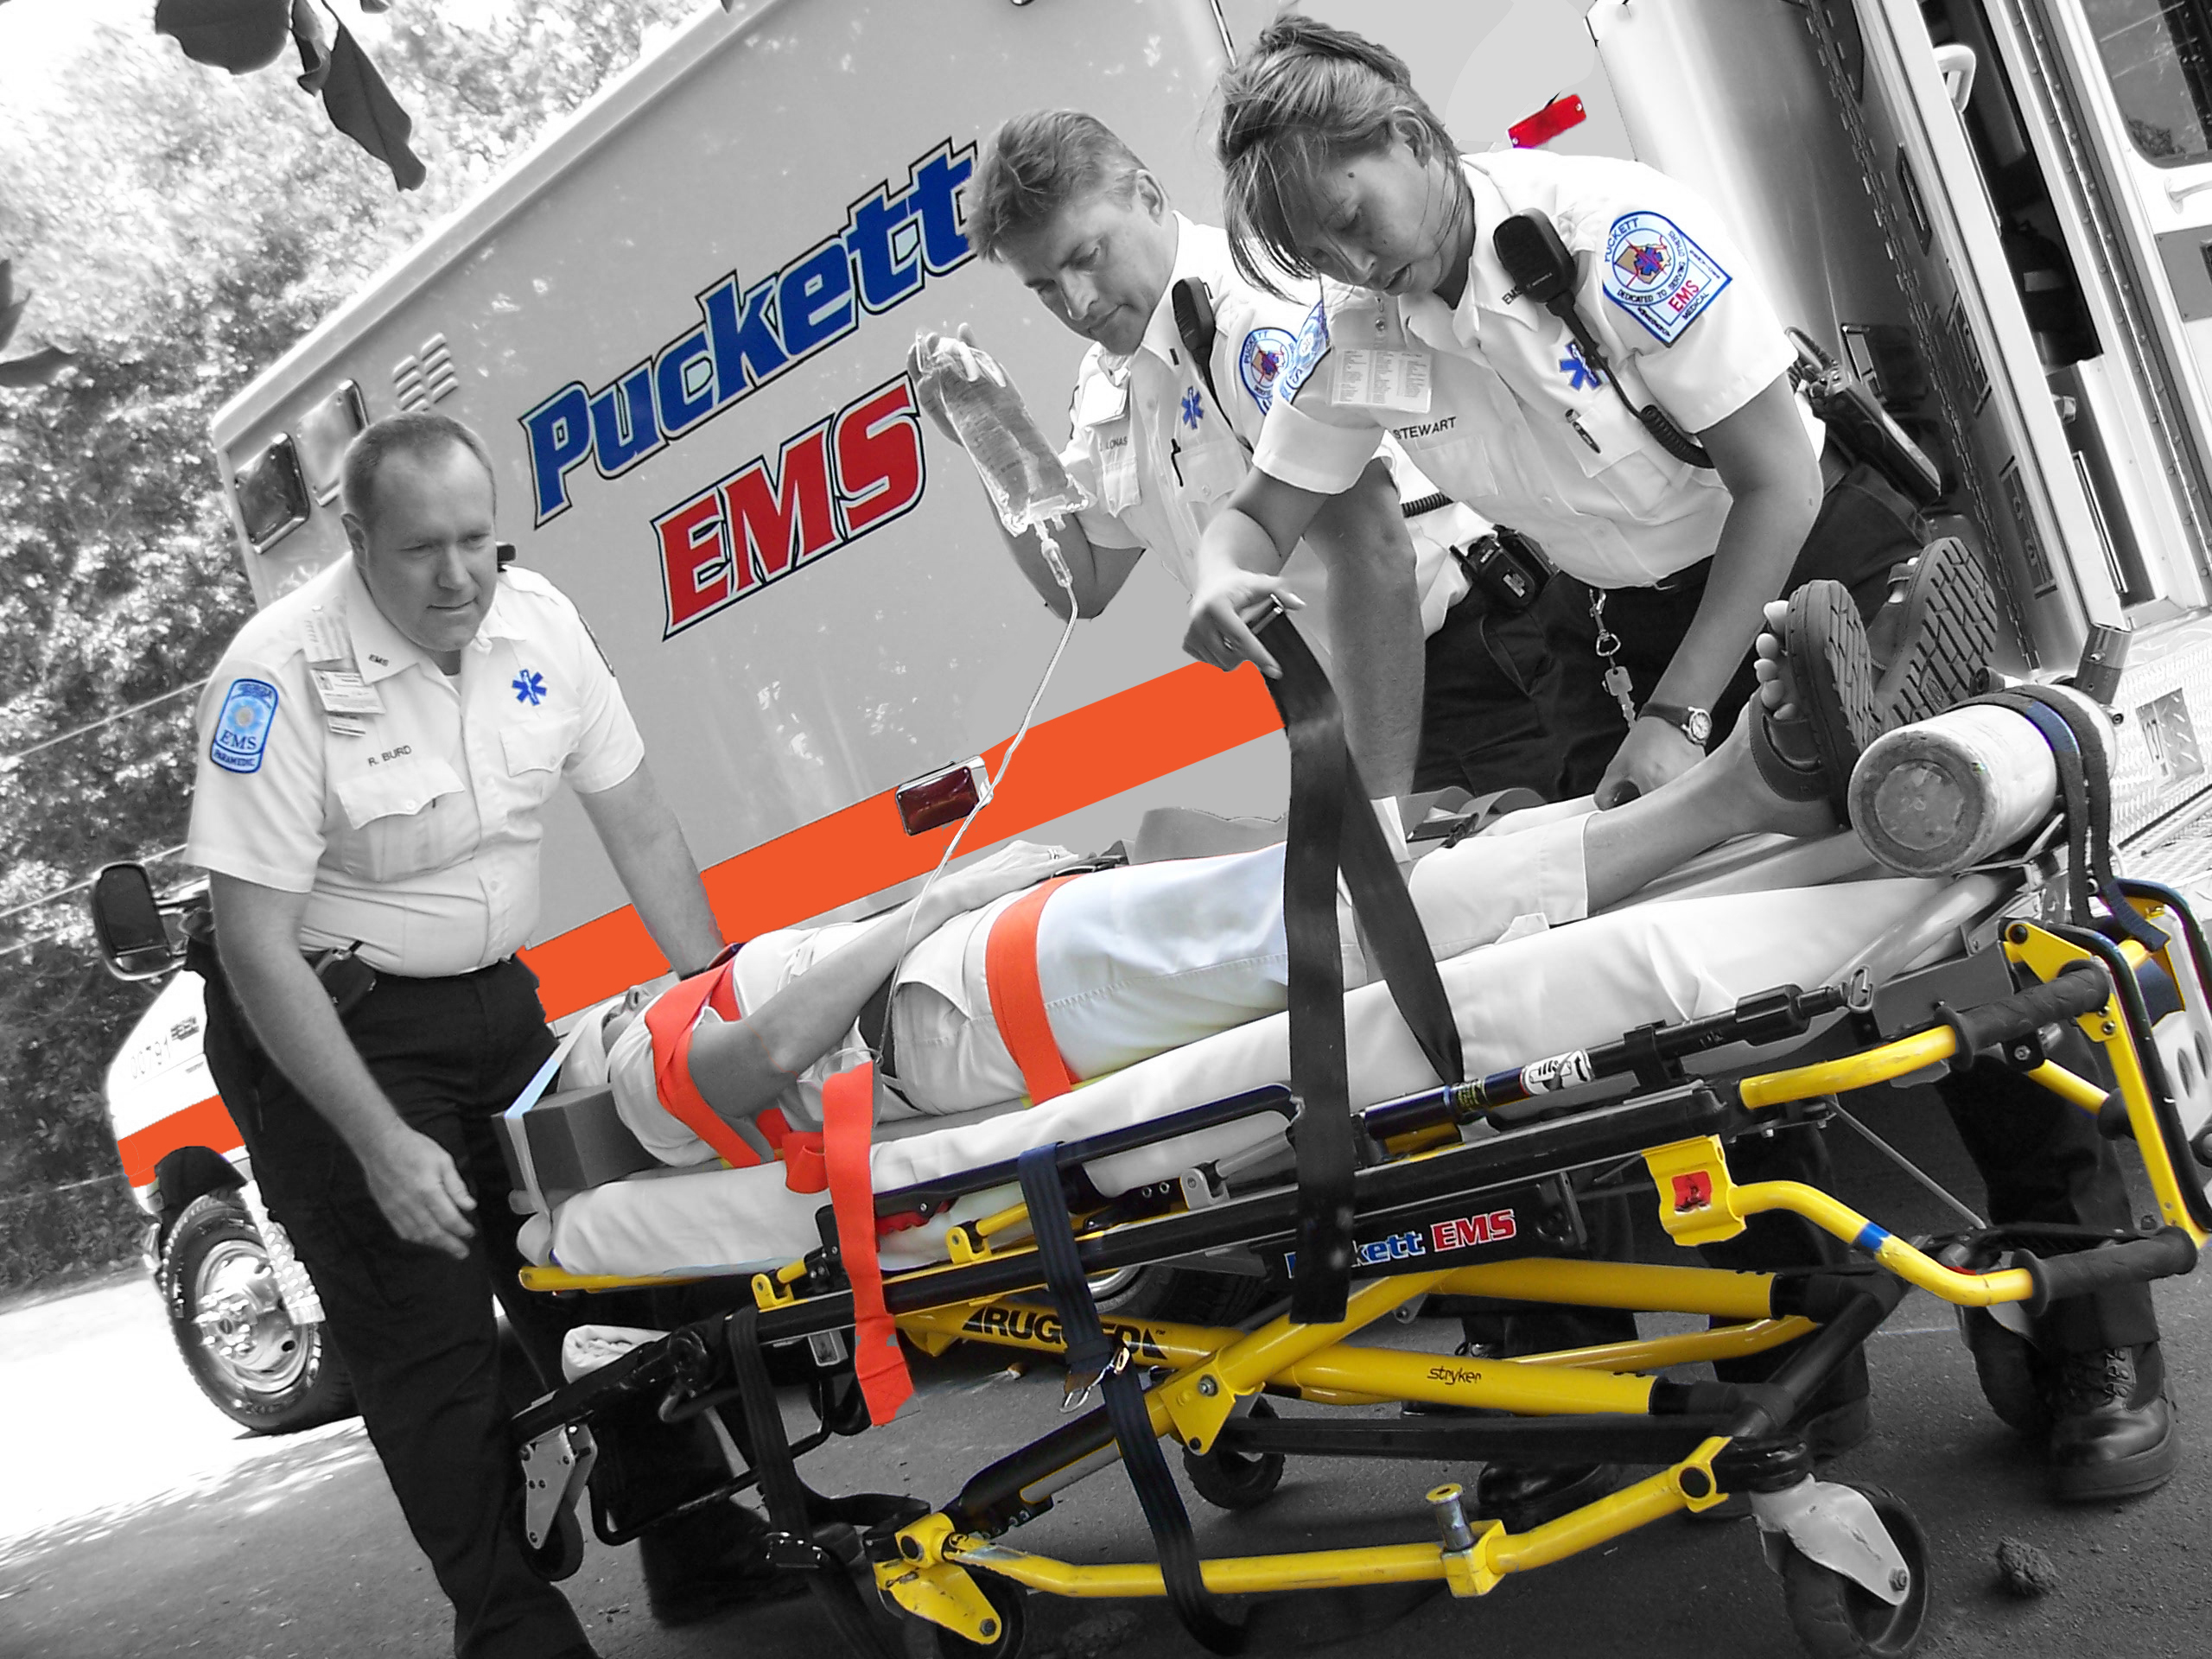 Featured image for “PUCKETT EMS EMT – BASIC CLASS”